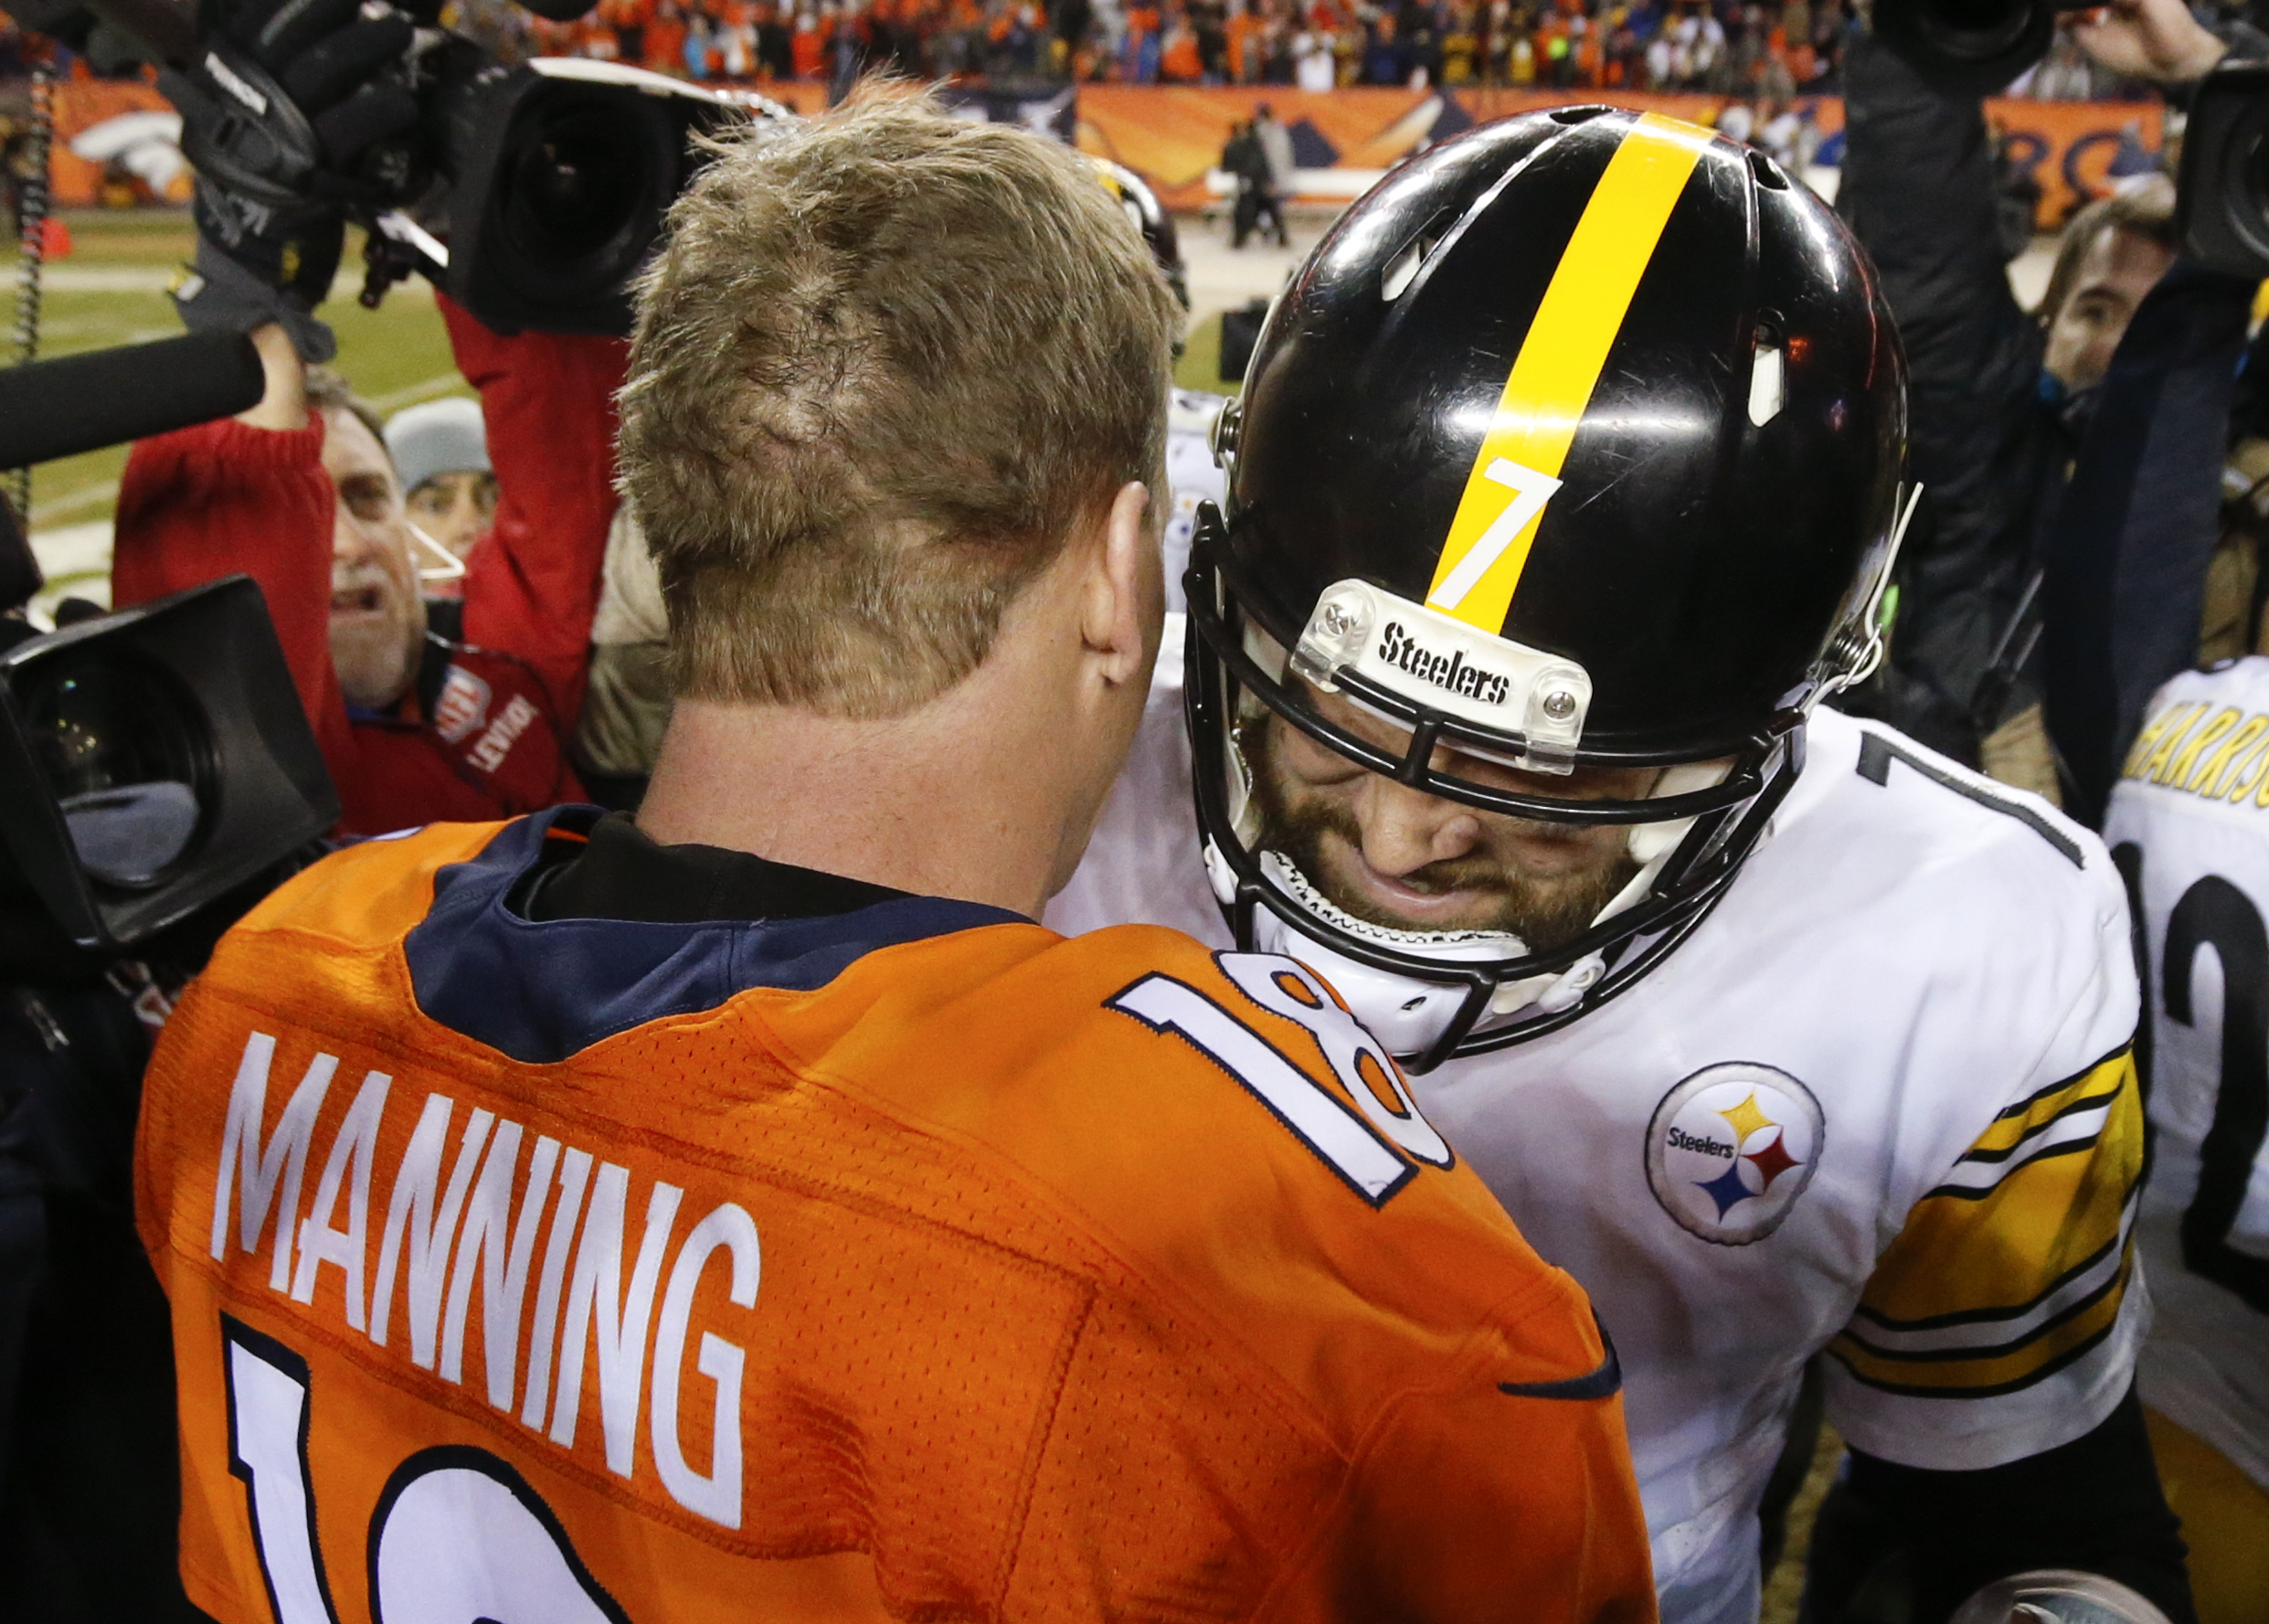 As Broncos And Pats Face Off, Does Manning Have Any Magic Left?